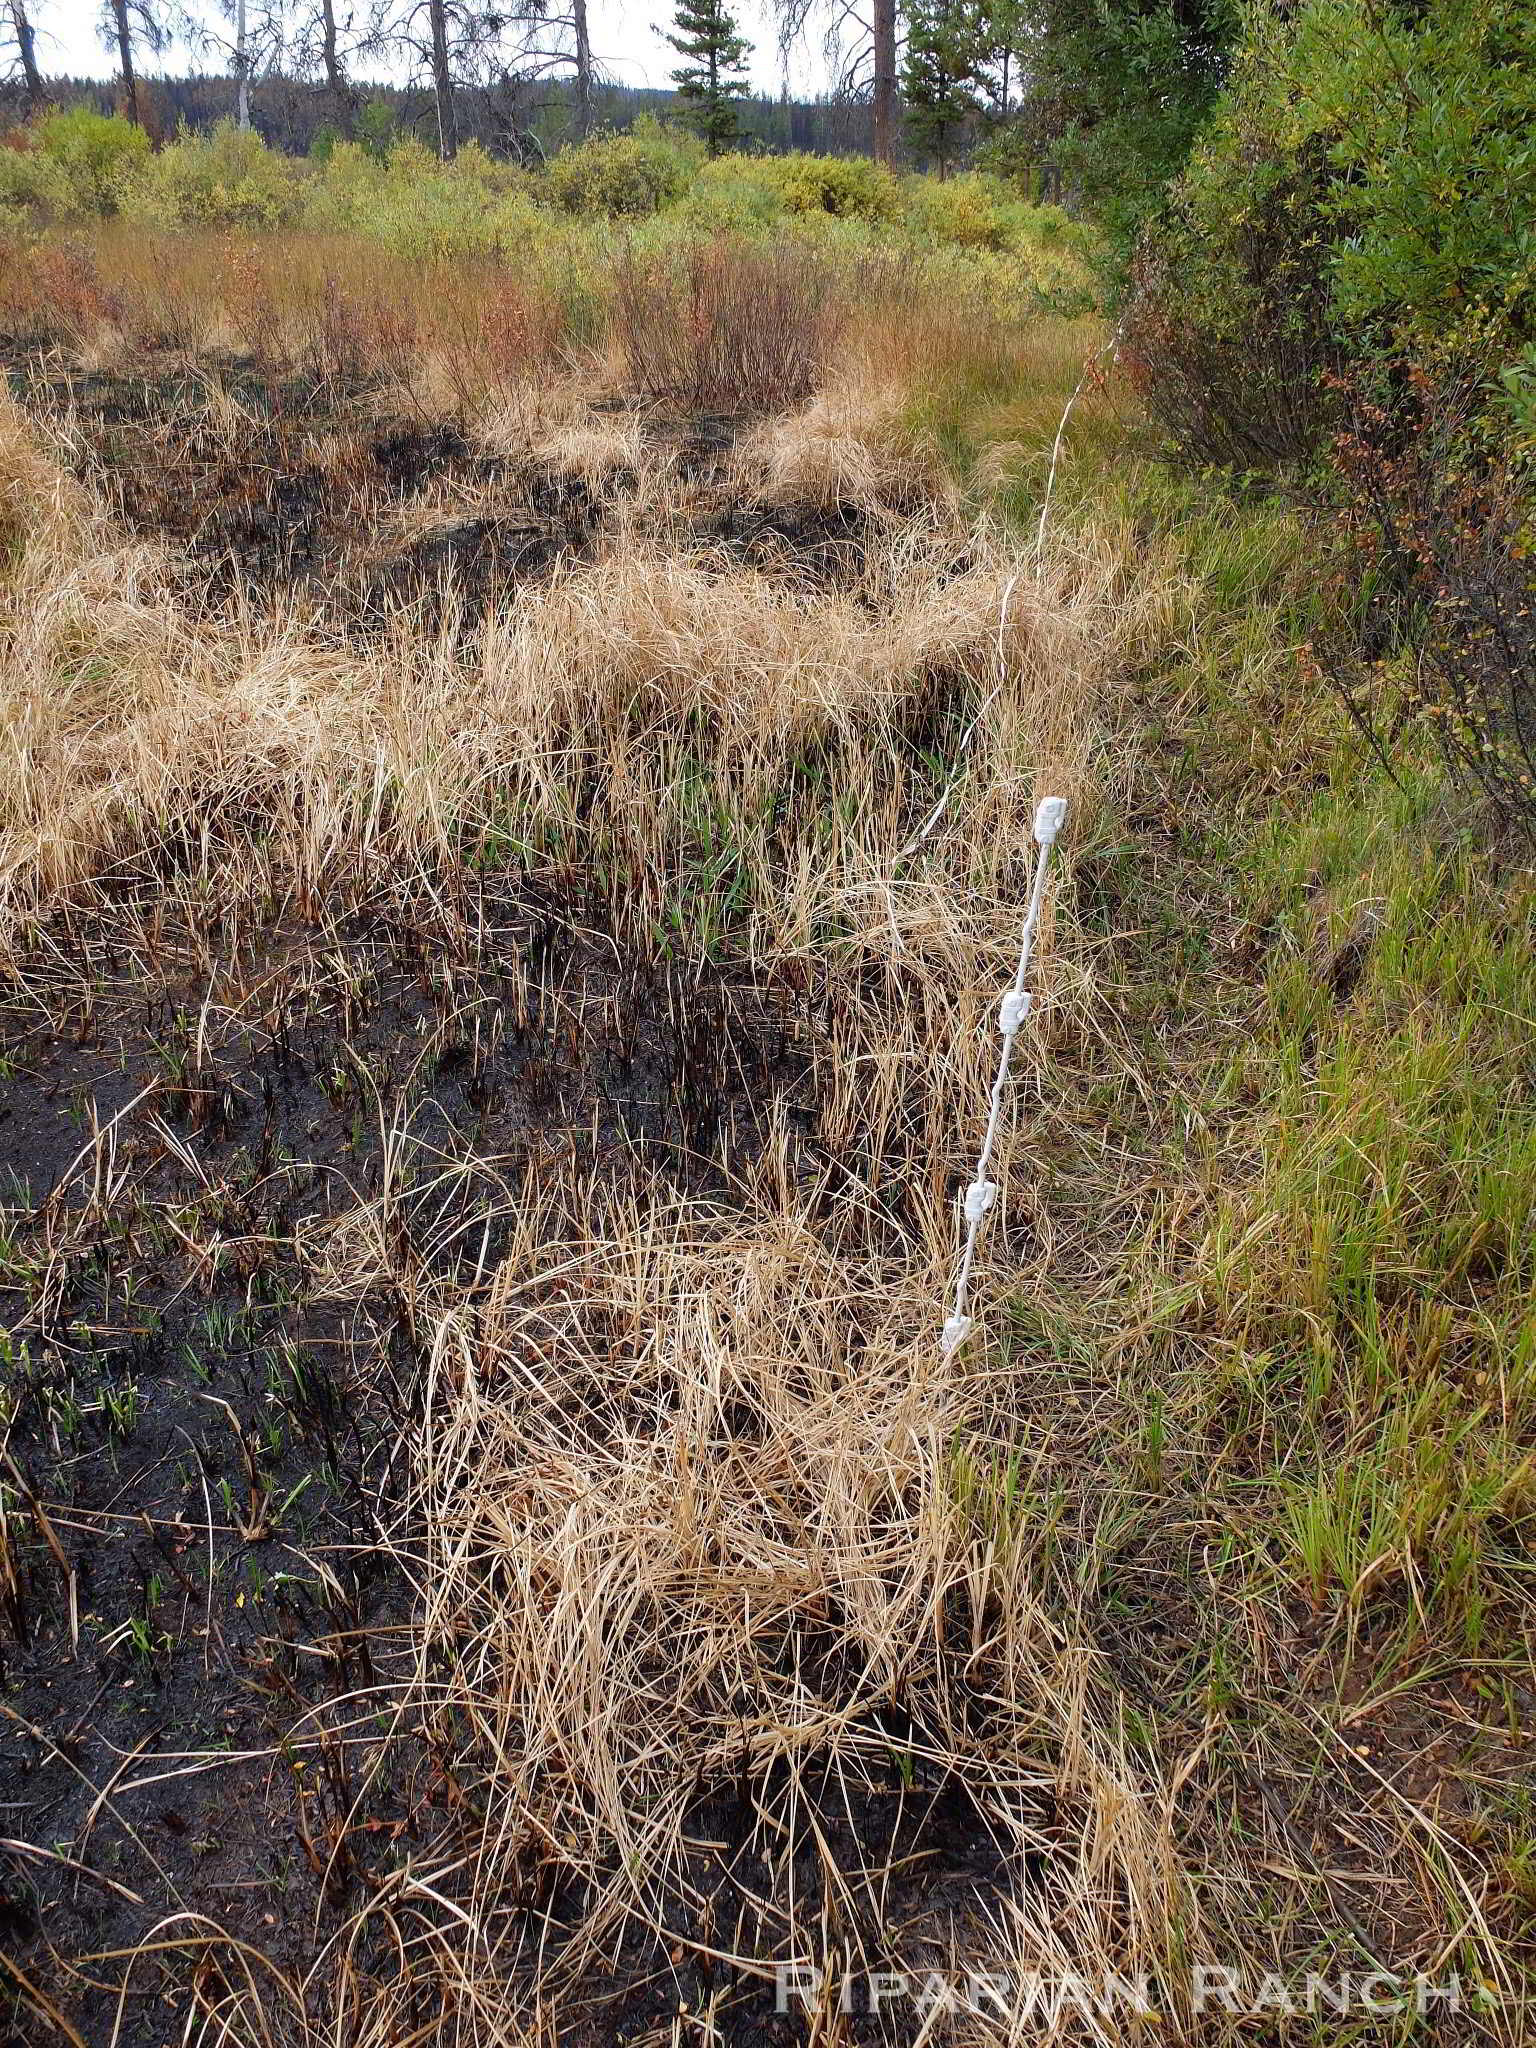 Rotationally grazed field with green plants on right and burned plants on left due to wildfires